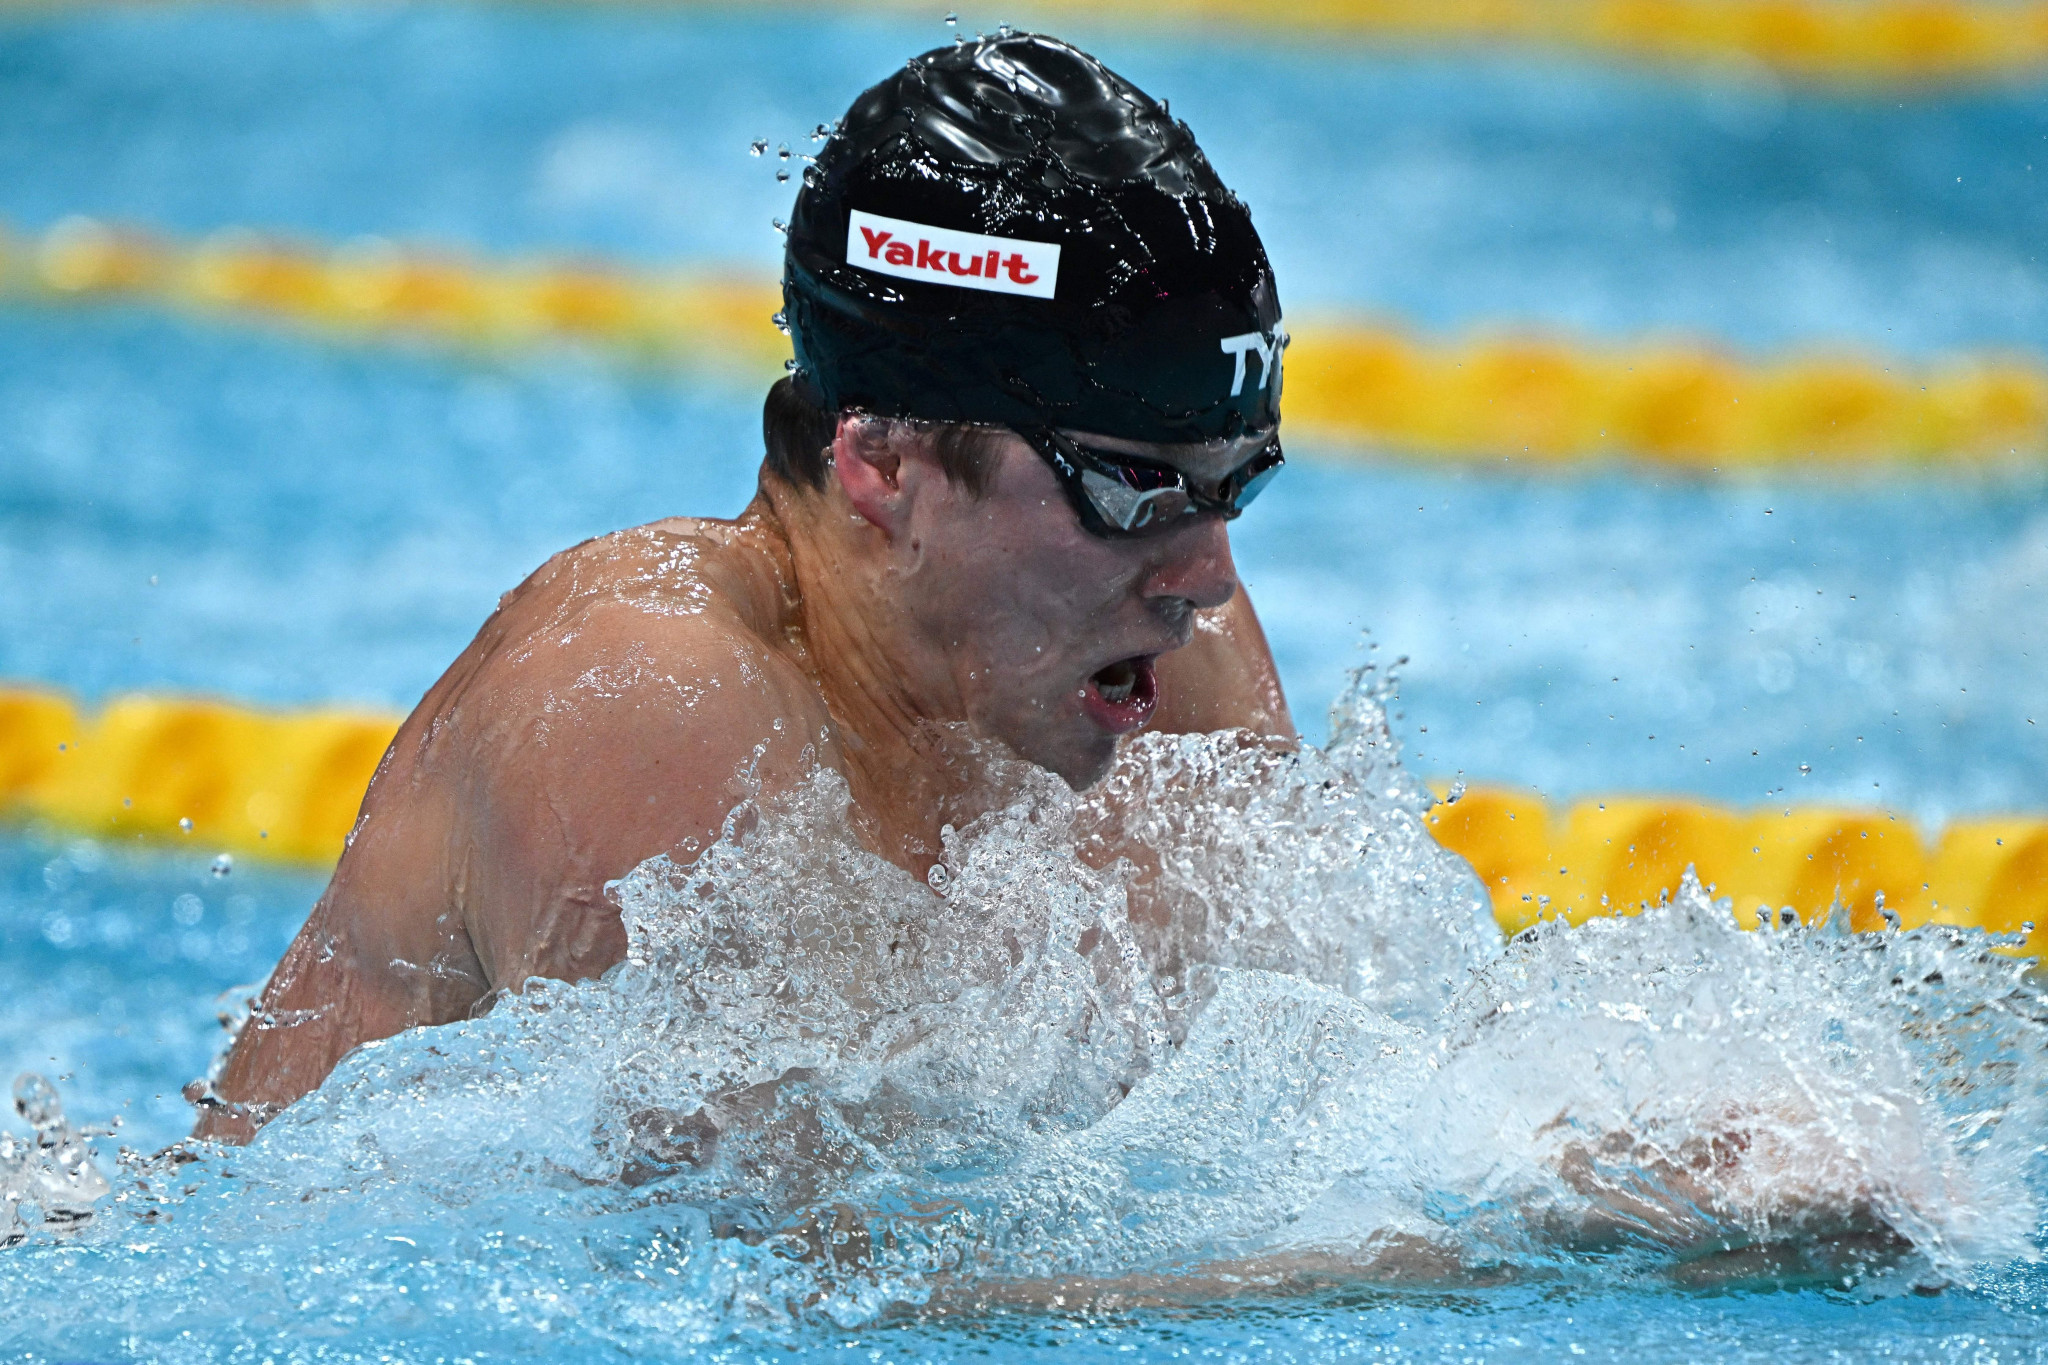 The United States' Nic Fink claimed a narrow victory in the men's 50m breaststroke final ©Getty Images